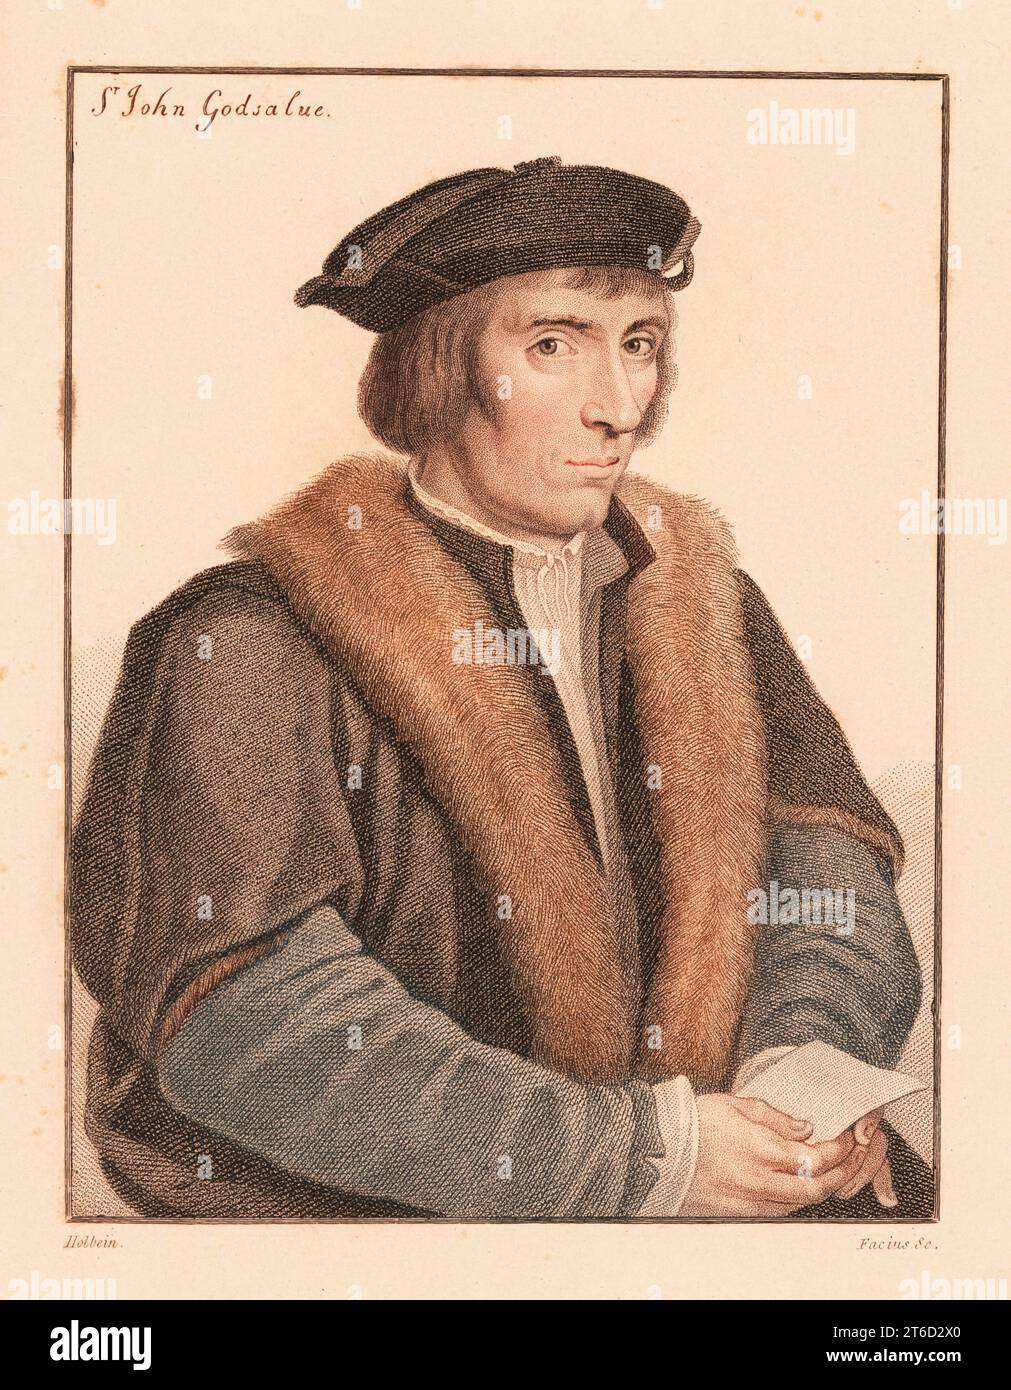 Sir John Godsalve, English politician, courtier to King Henry VIII, Comptroller of the Mint to King Edward VI, died 1557. Sir John Godsalue. Handcoloured copperplate stipple engraving by George Sigmund Facius after a portrait by Hans Holbein the Younger printed on pink paper from Imitations of Original Drawings by Hans Holbein, John Chamberlaine, London, 1812. Stock Photo